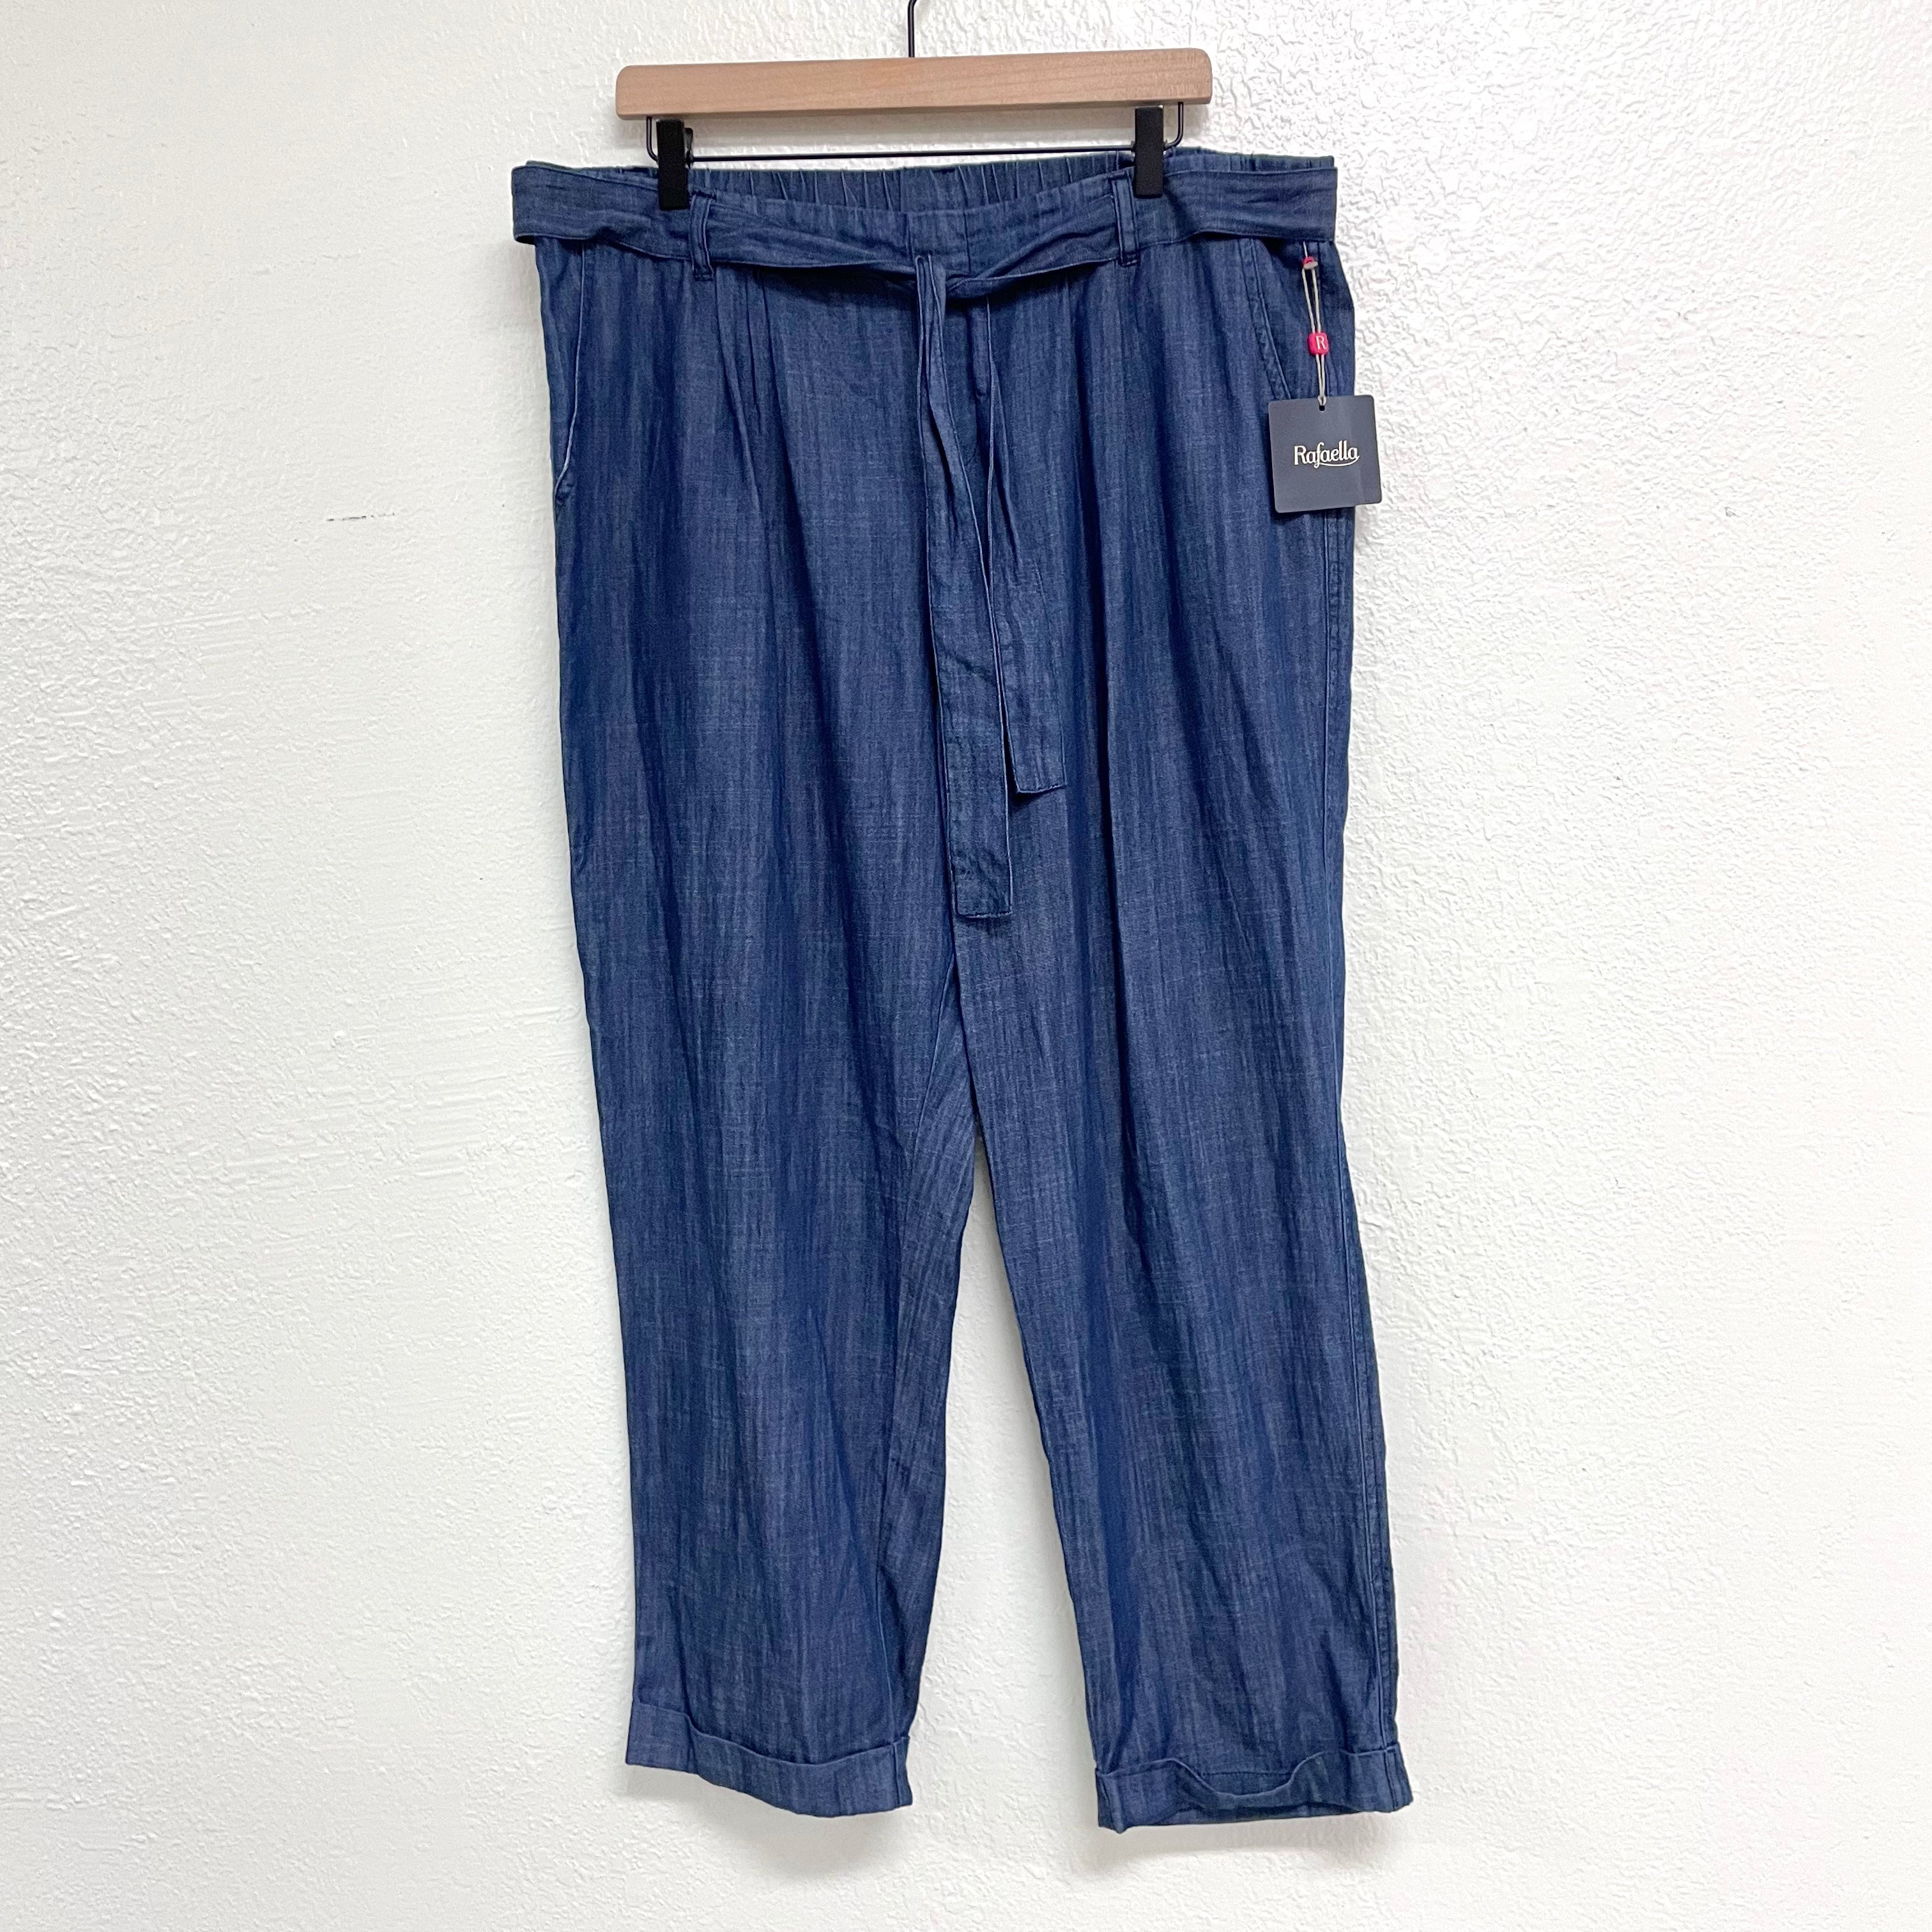 Chambray Belted Pants